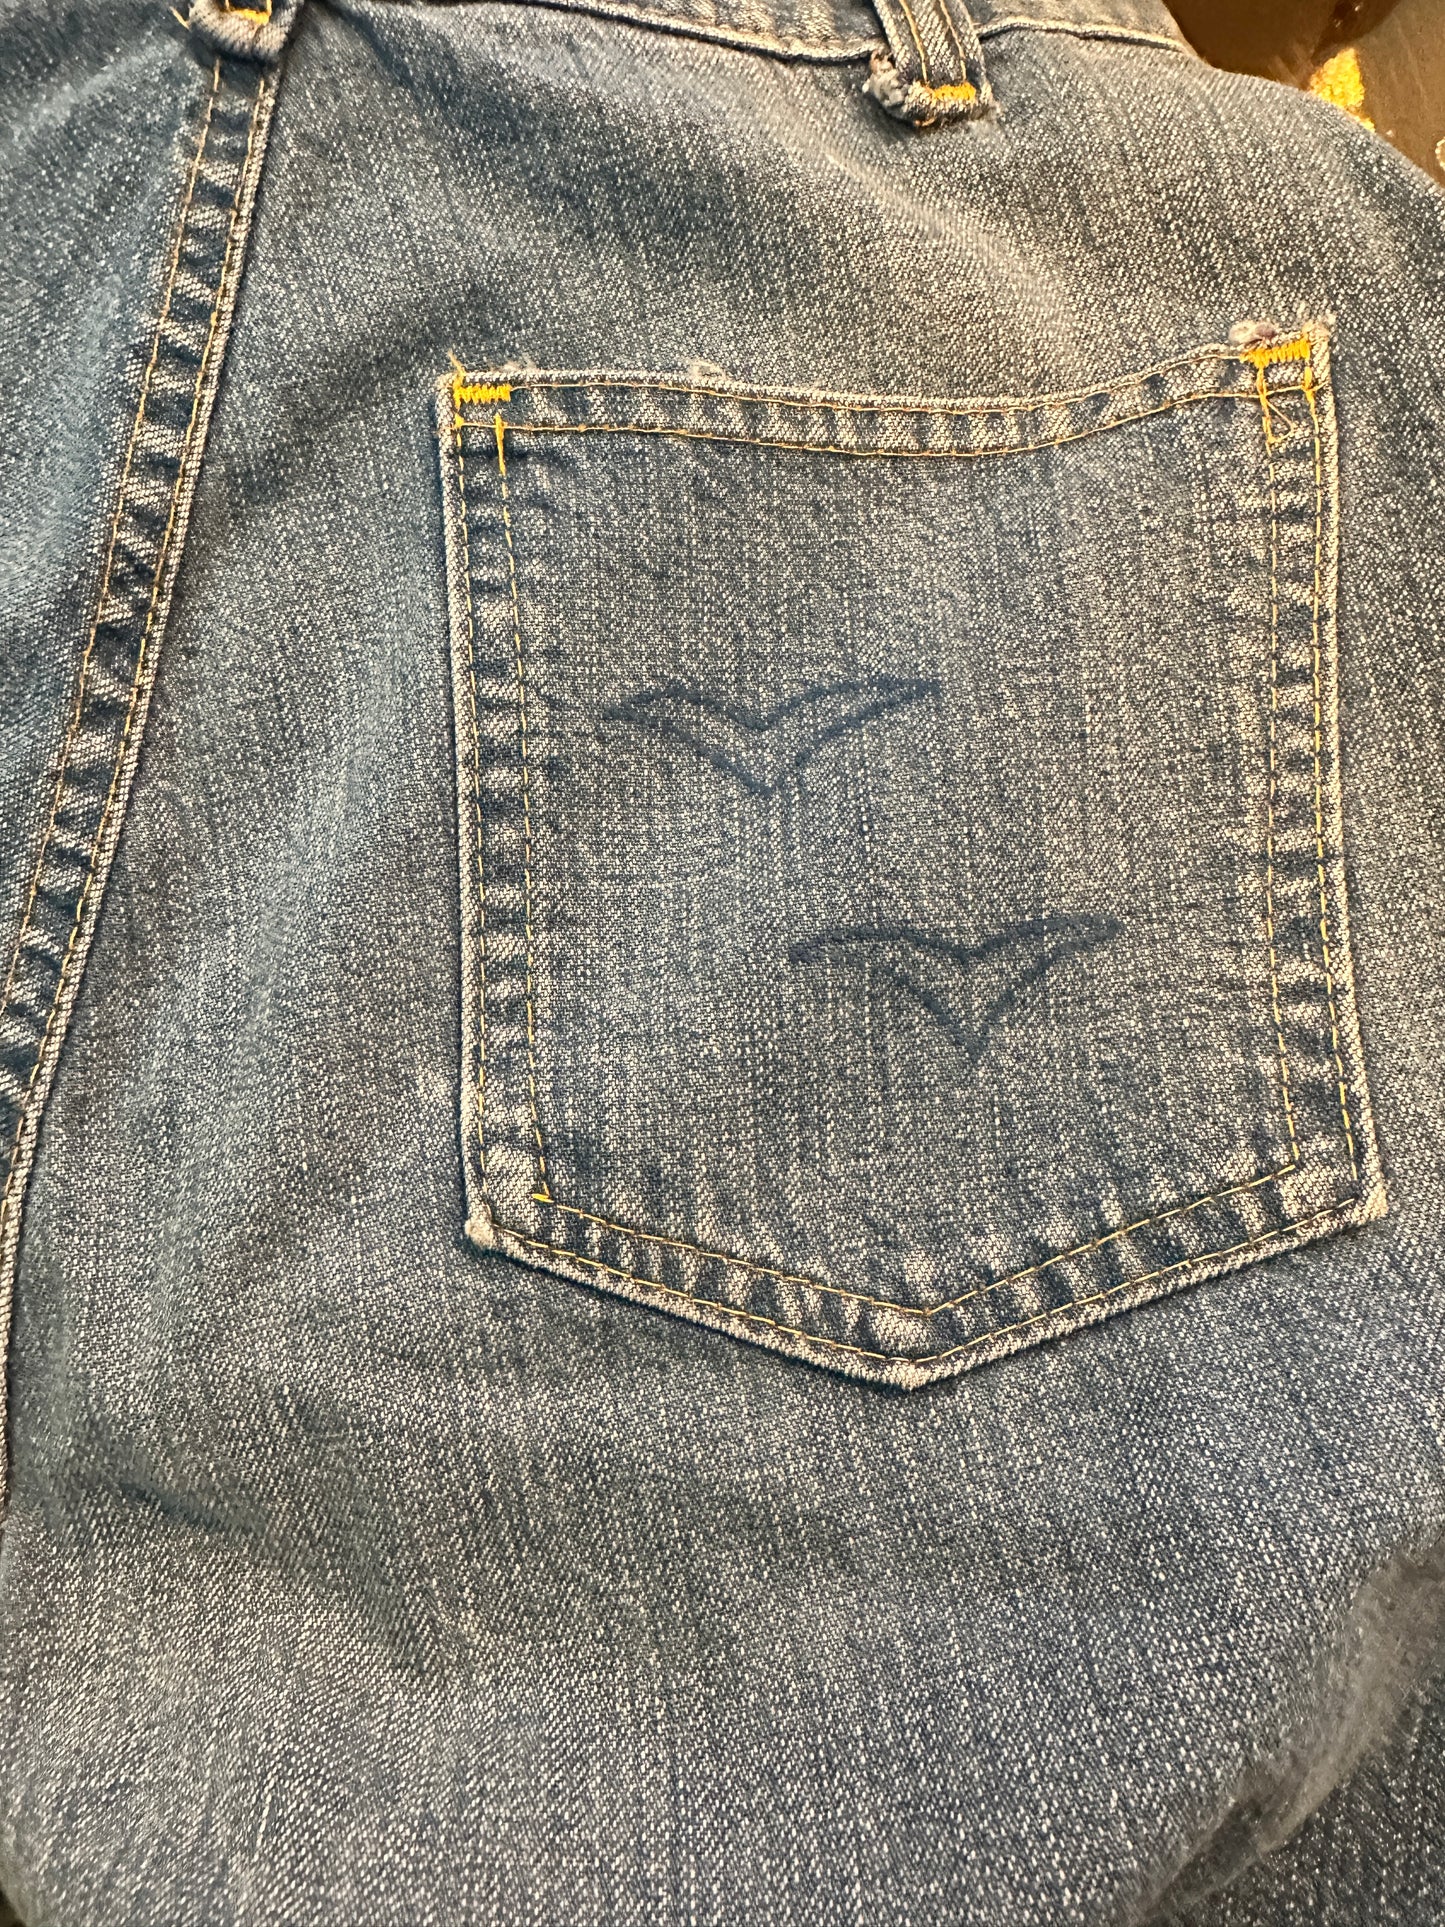 1970's Wide Leg Jeans with Birds - 27